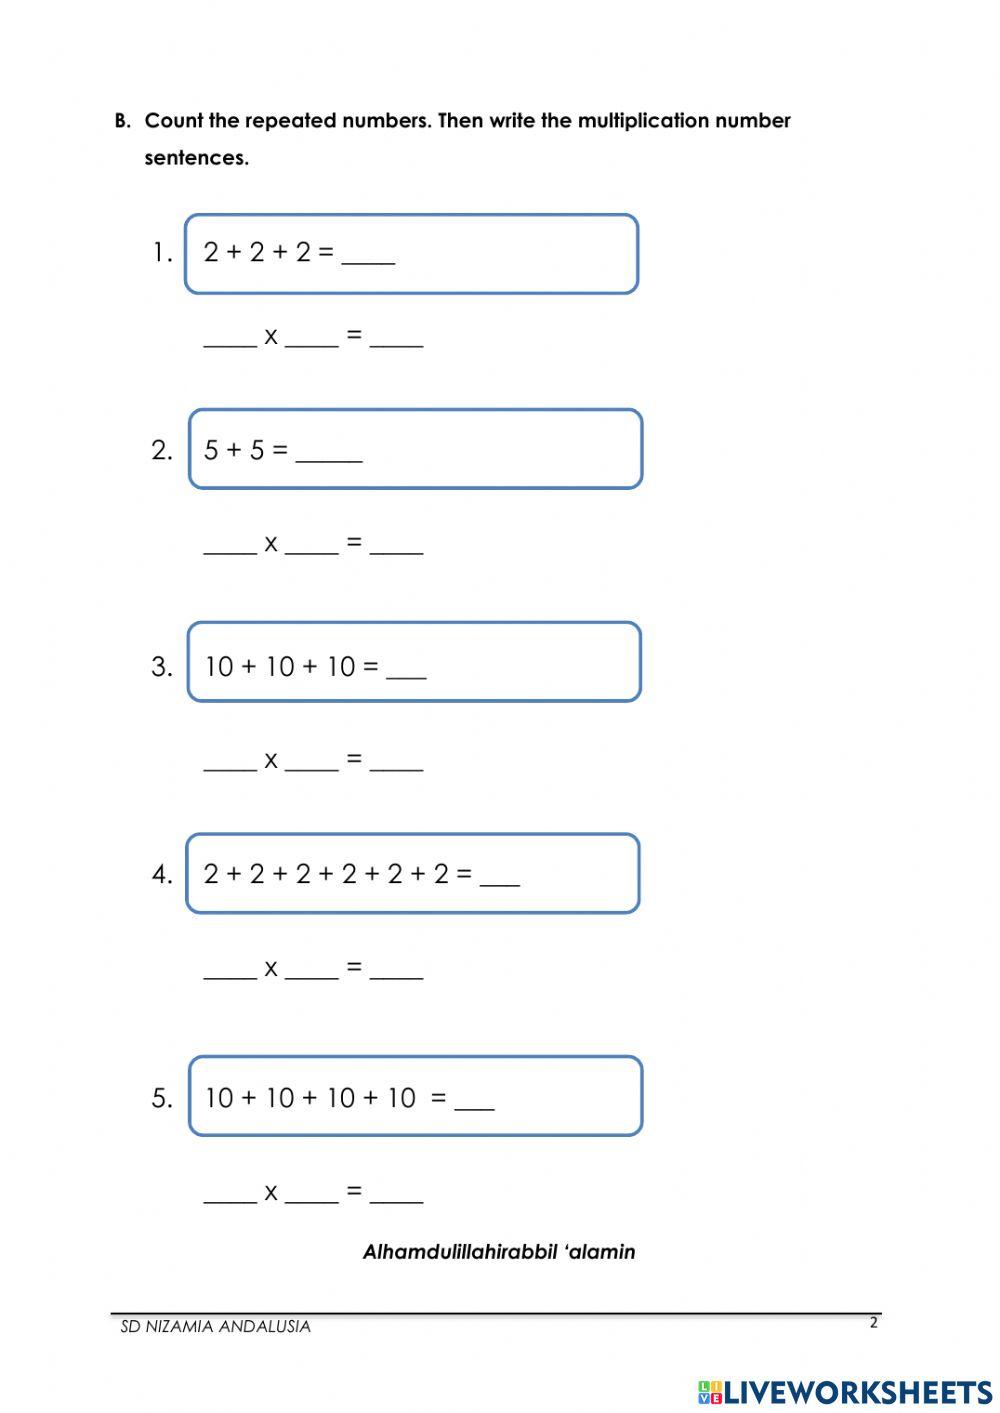 Multiplying in 2, 5 and 10